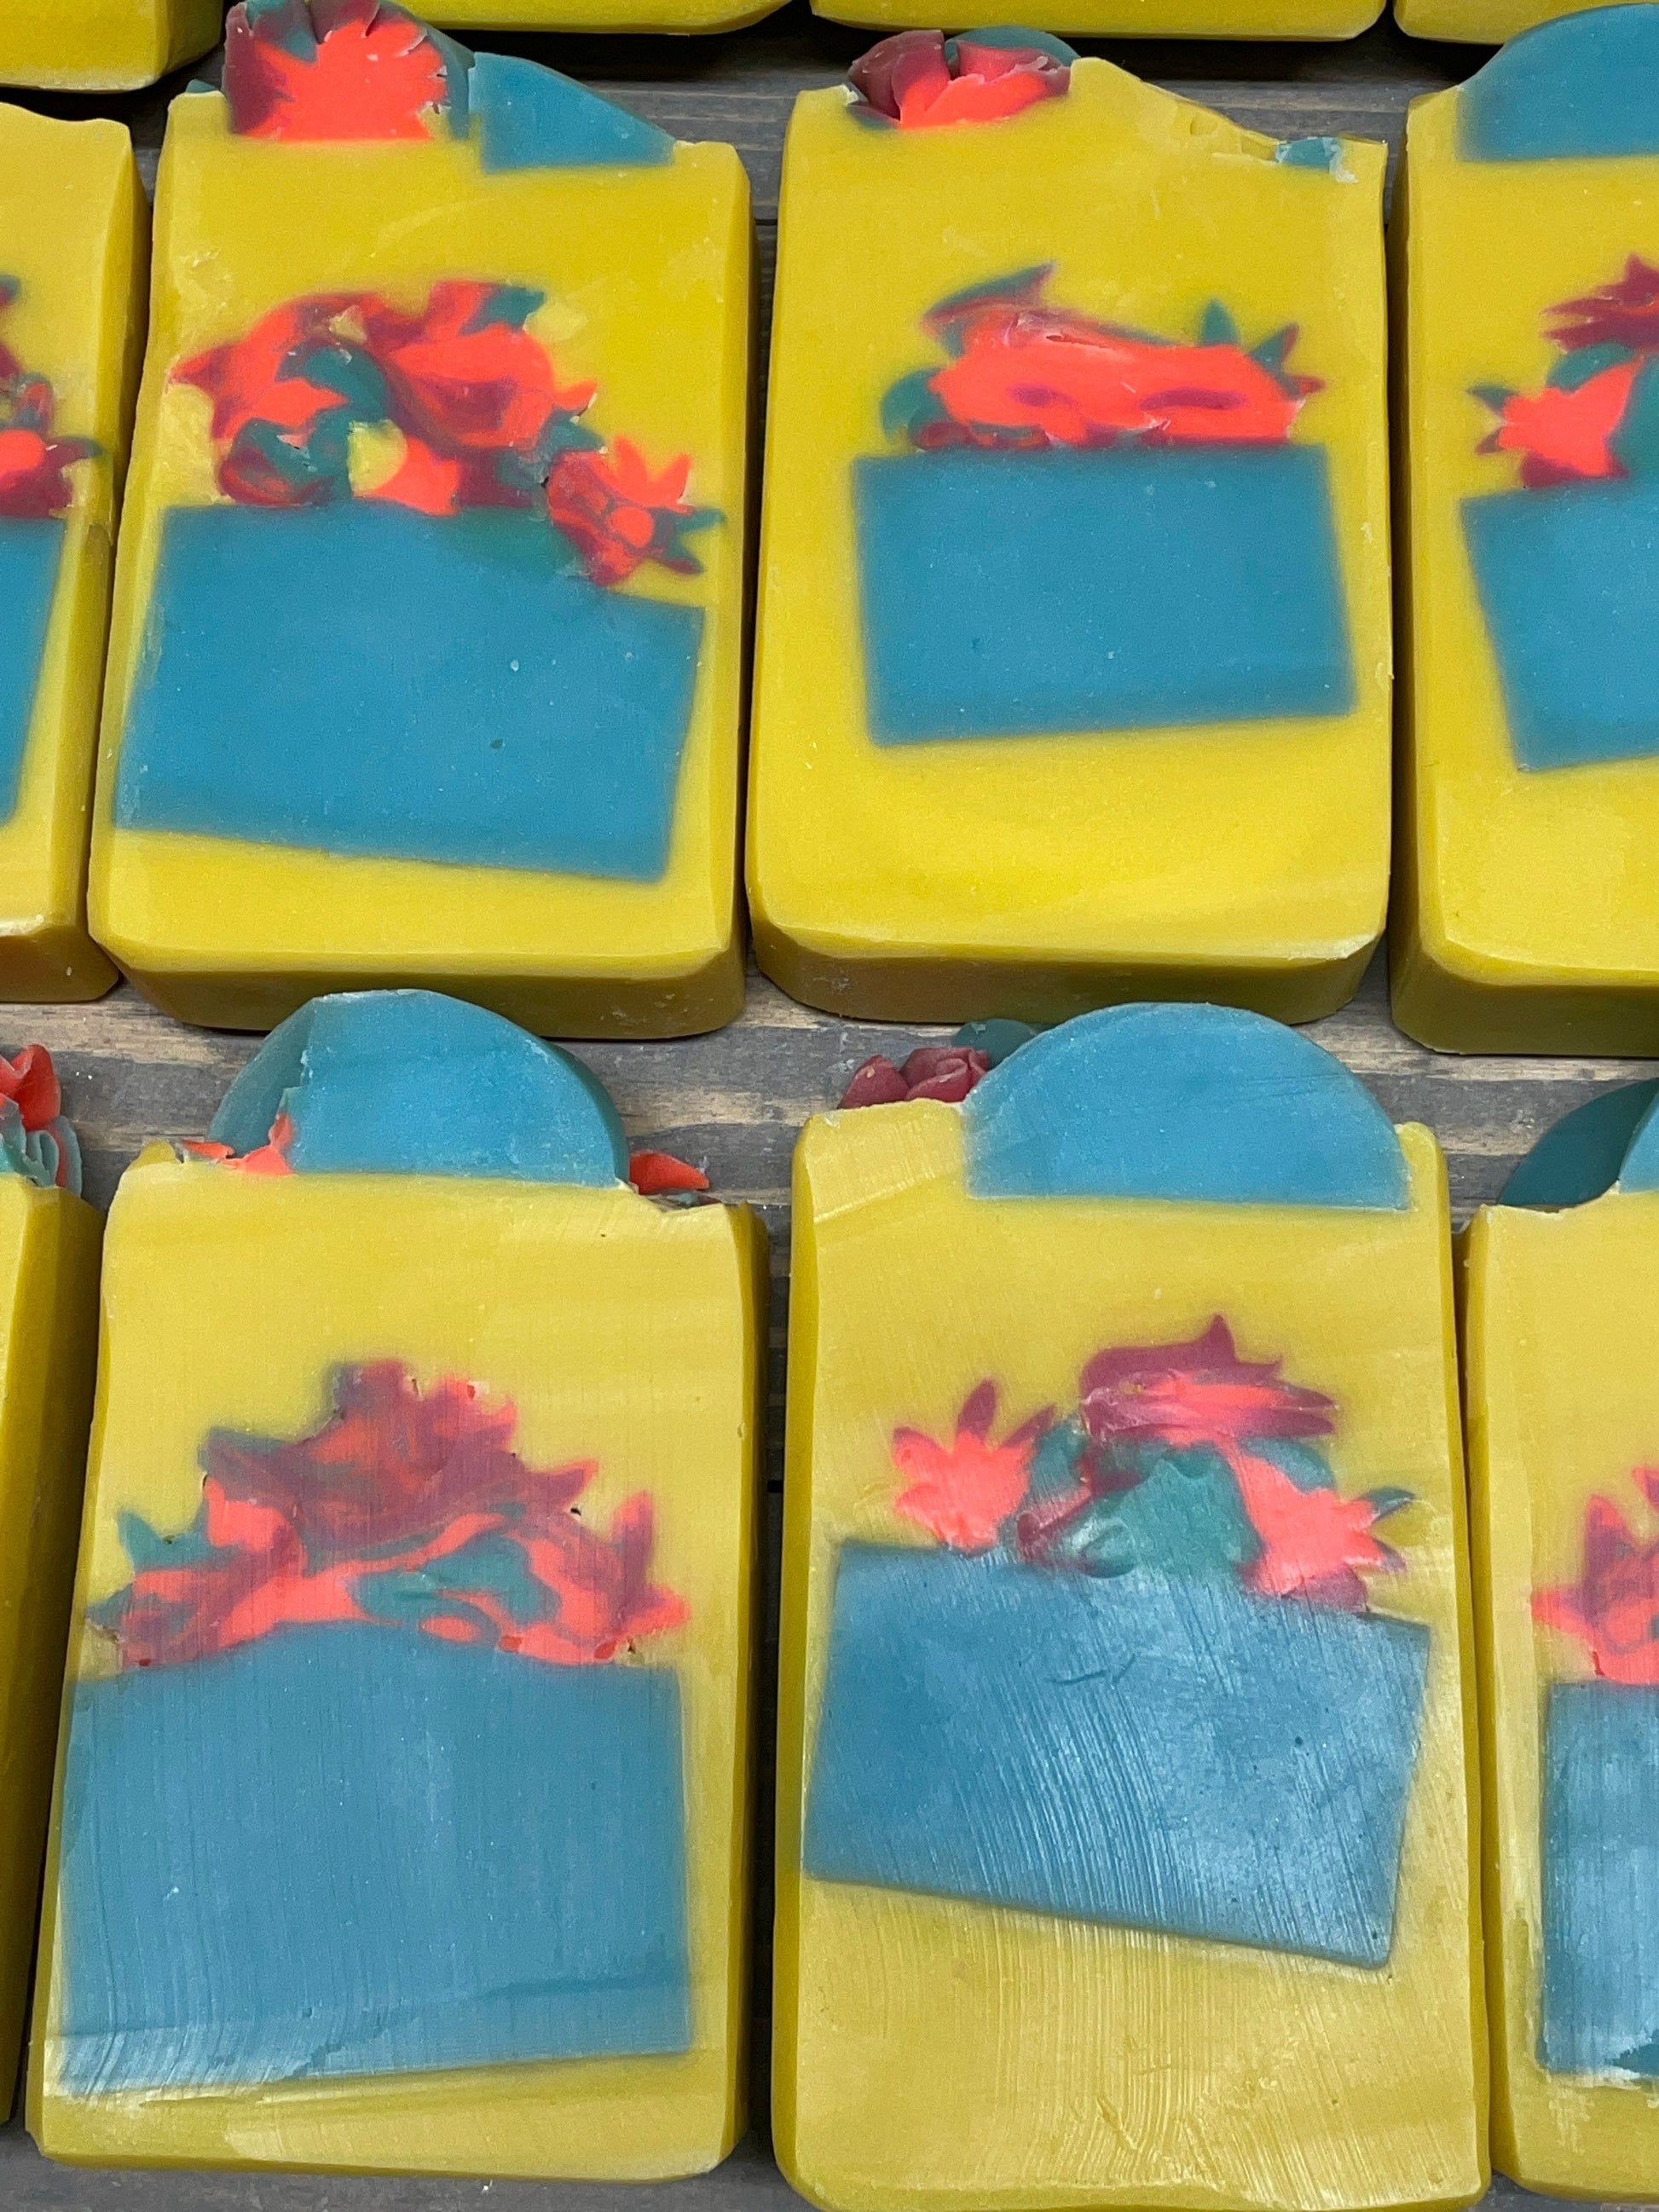 A photo of Fruity Cupcake Soap Bars with yellow, blue colors